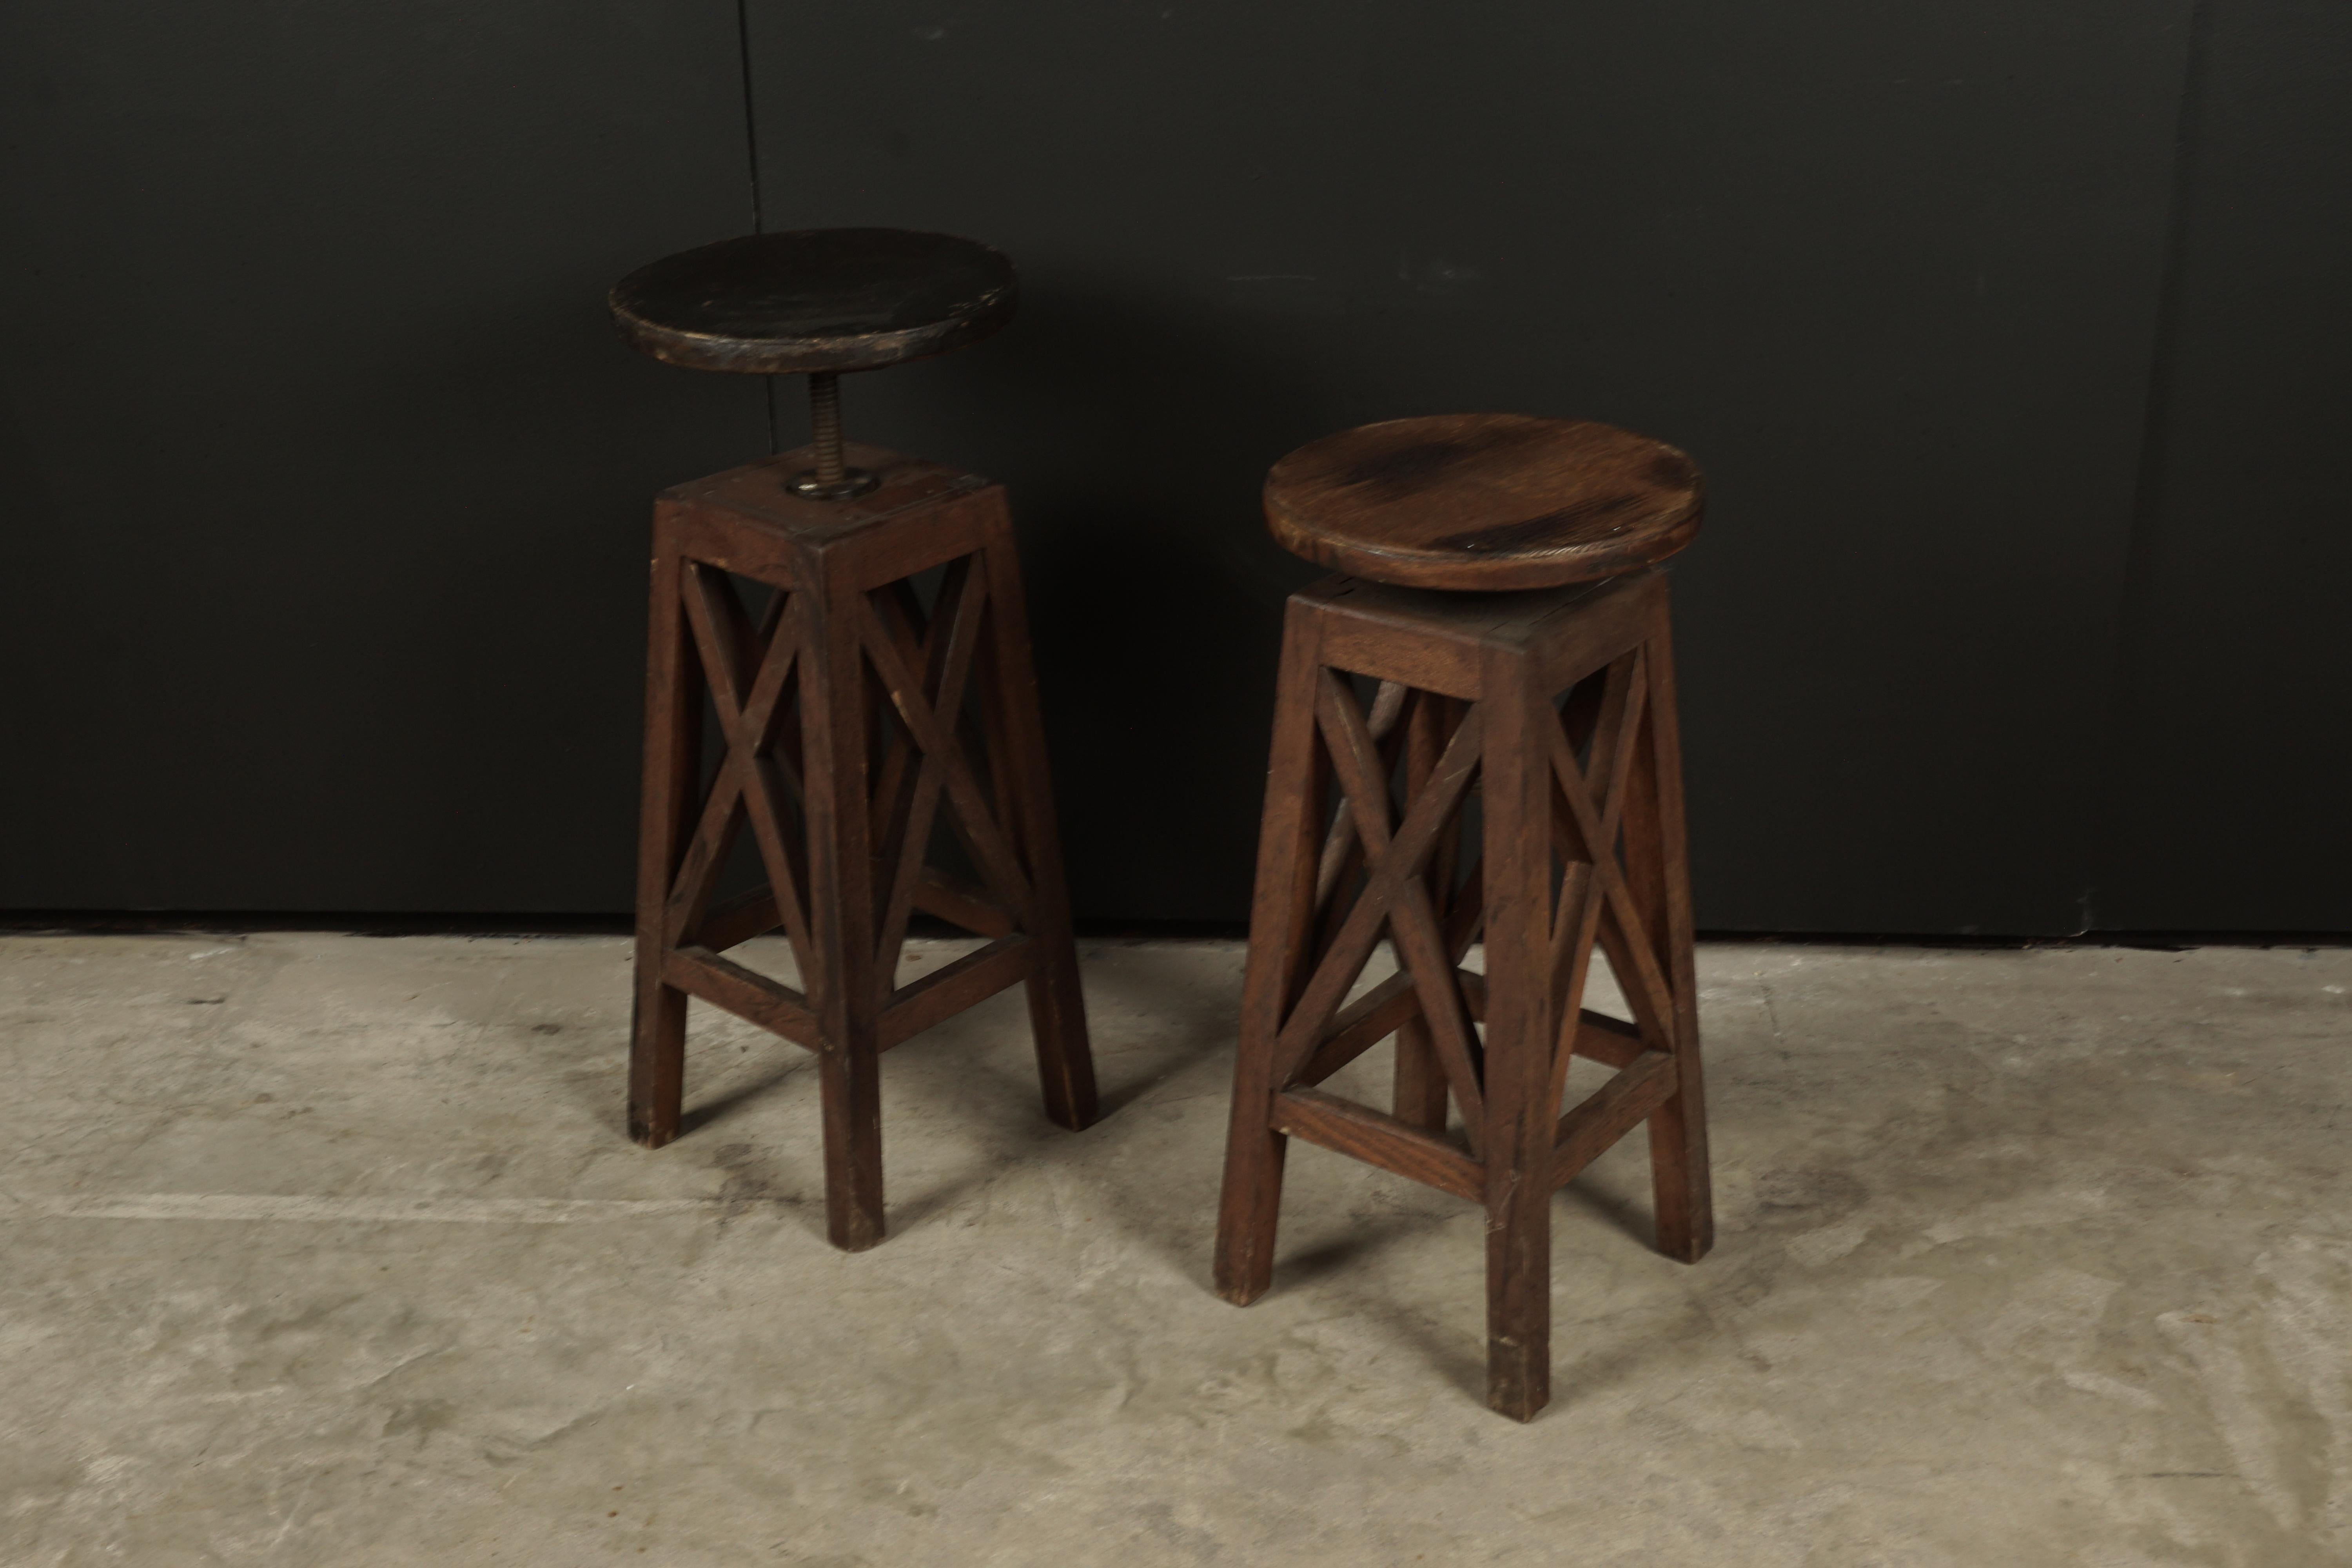 Vintage pair of oak pedestals from France, circa 1950. Solid oak construction with adjustable platform height. Light wear and patina.